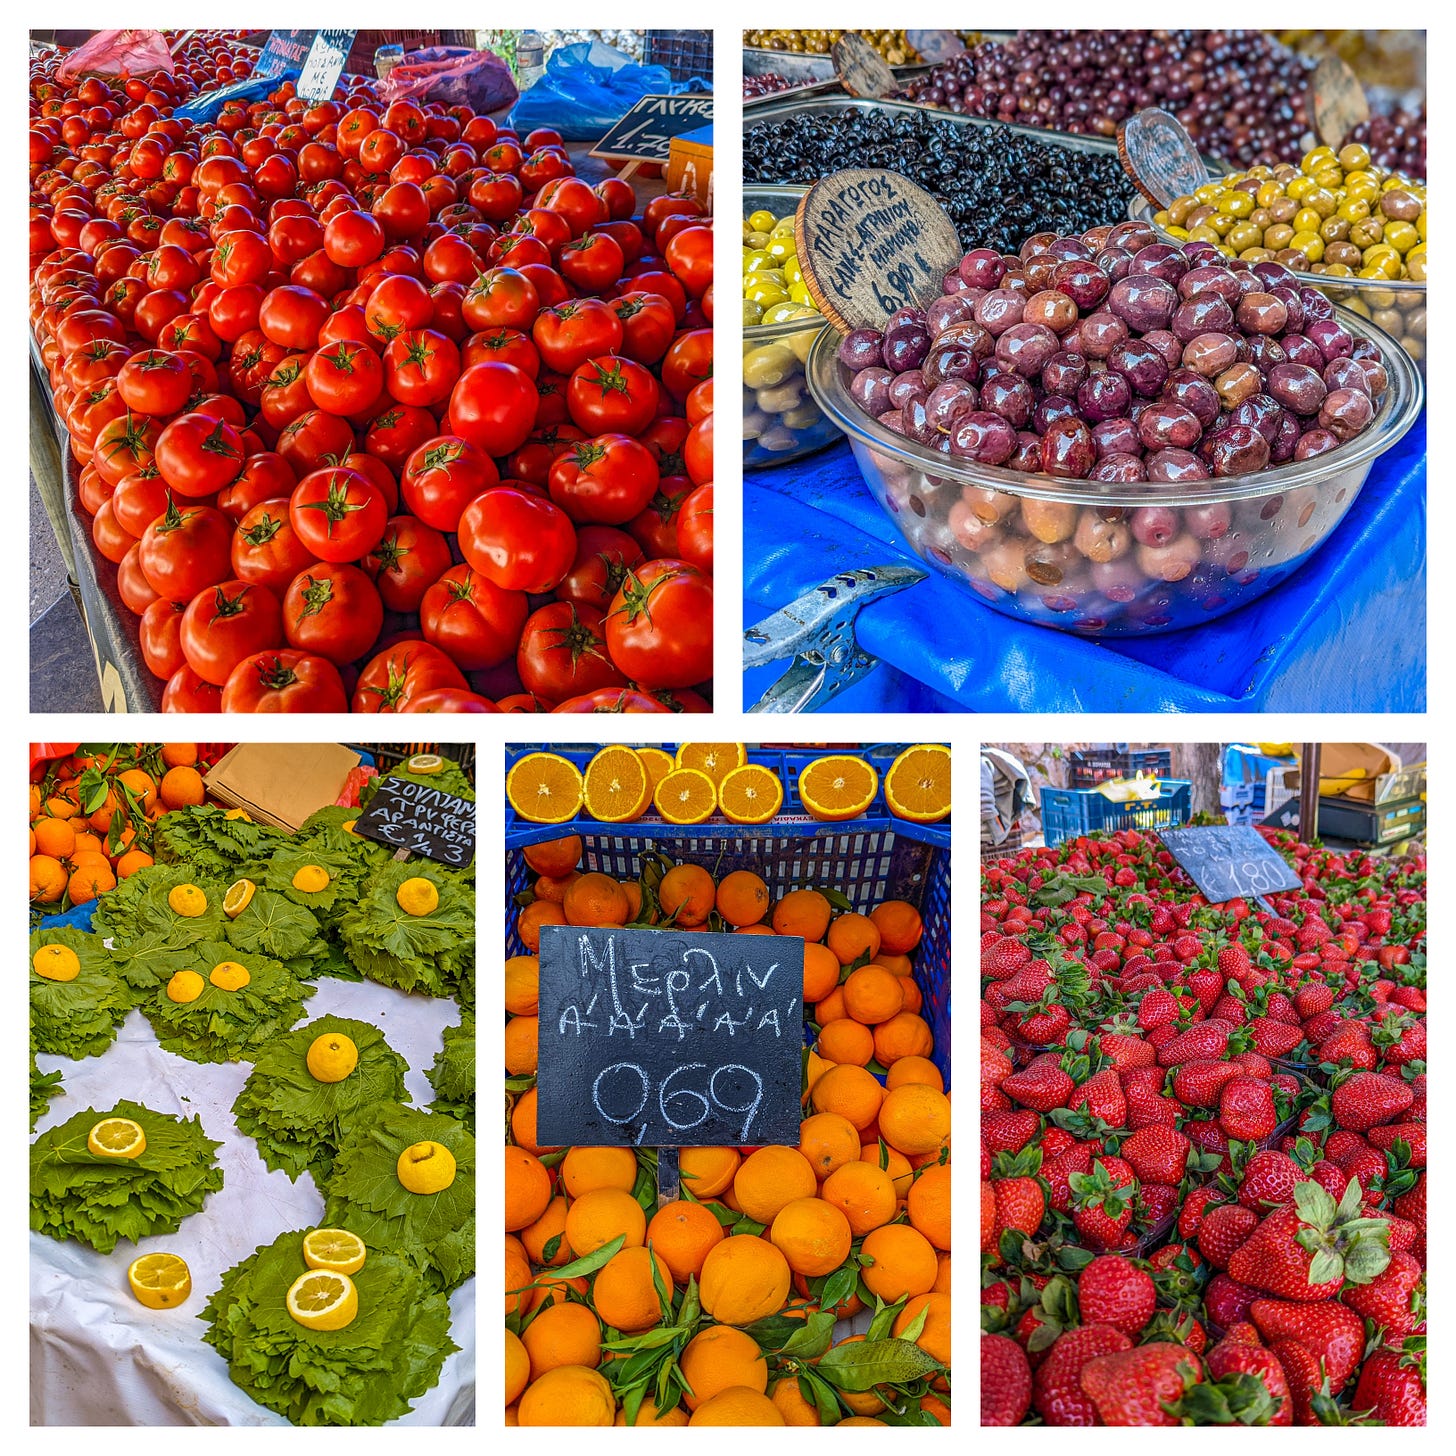 Collage showing piles of bright red tomatoes, bowls of olives, stacks of green herbs, piles of oranges, and bright red strawberries heaped on a table. 